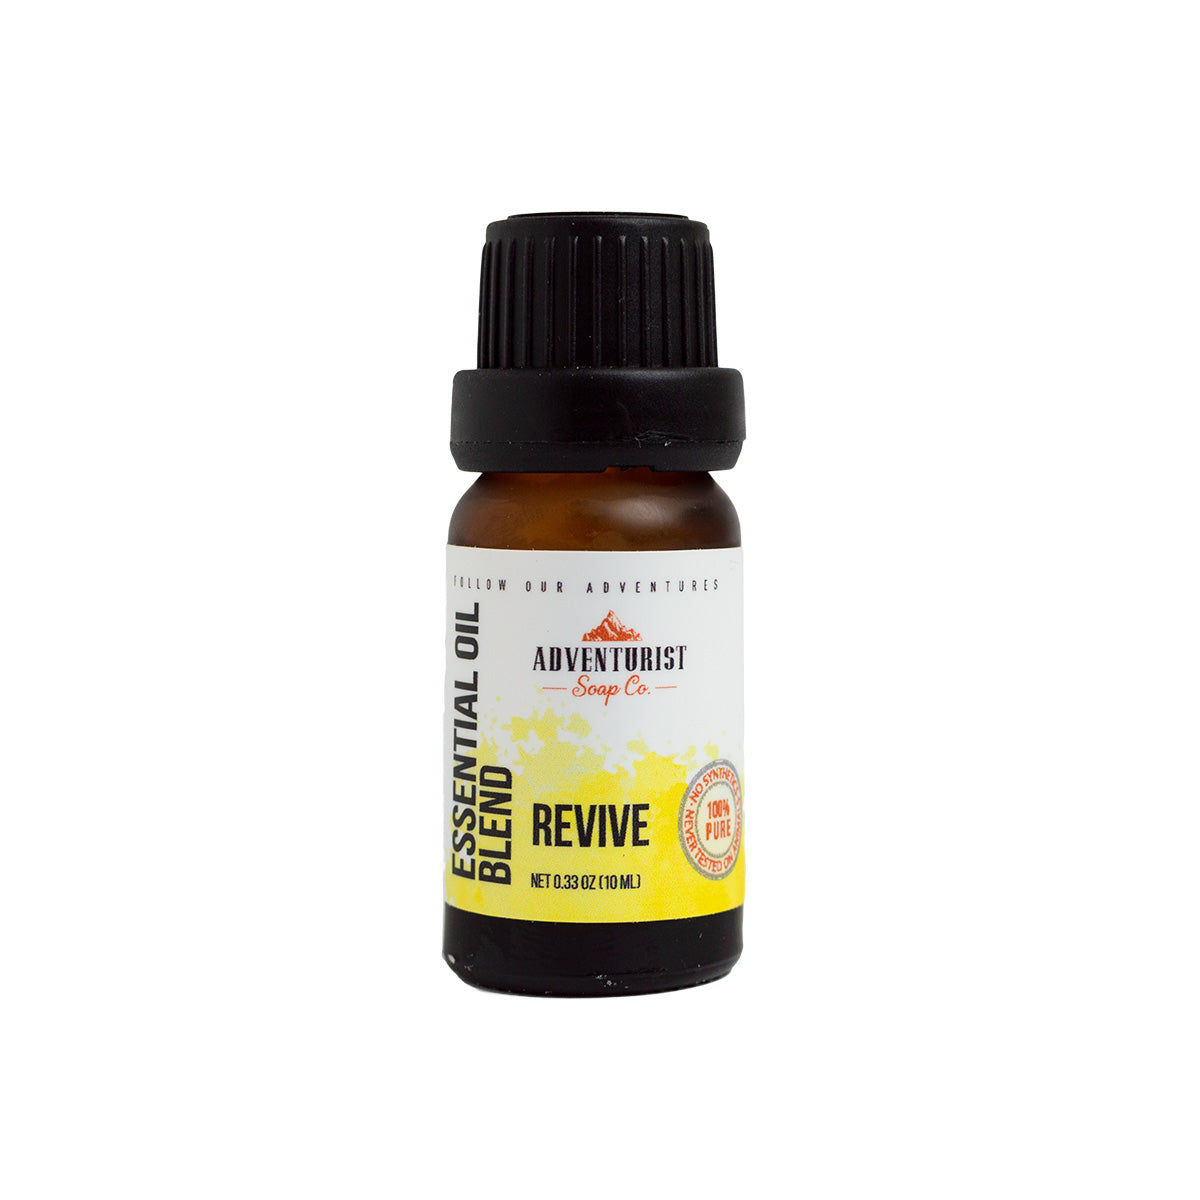 Top 25 Uses Of The REVIVE Basics Kit - REVIVE Essential Oils